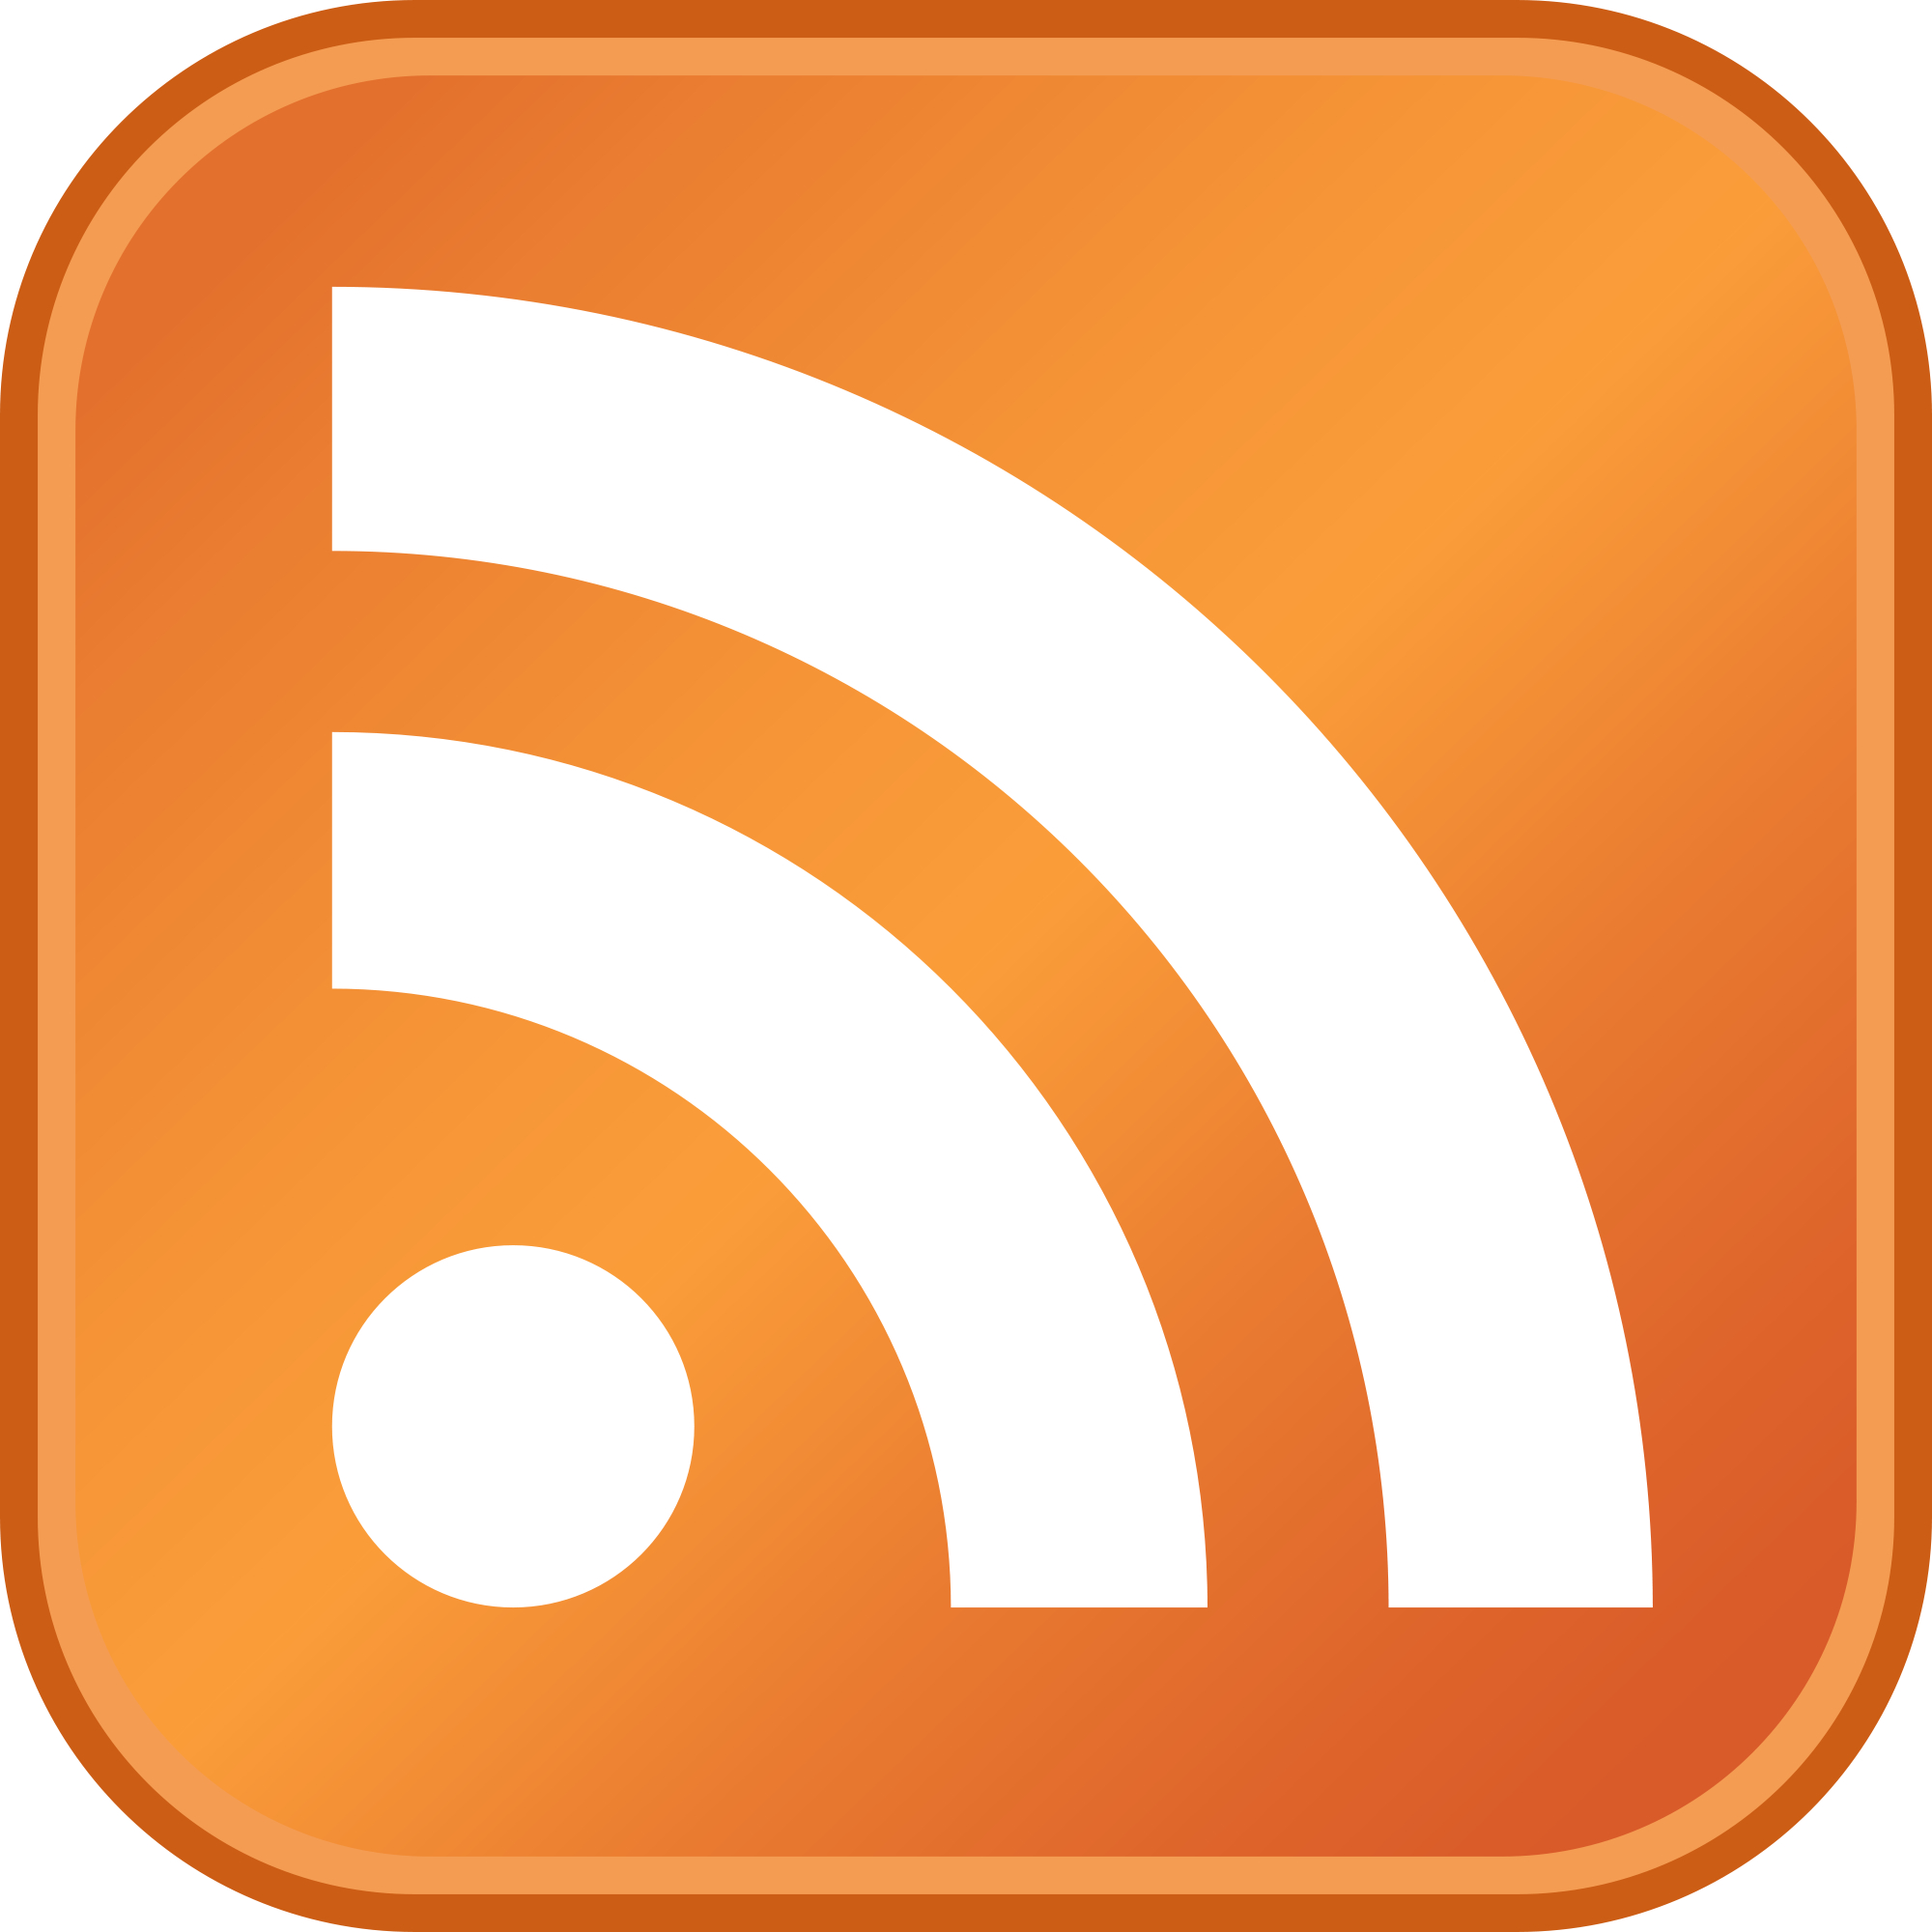 Rss Subscribe Icon | Free Images - vector clip art ...